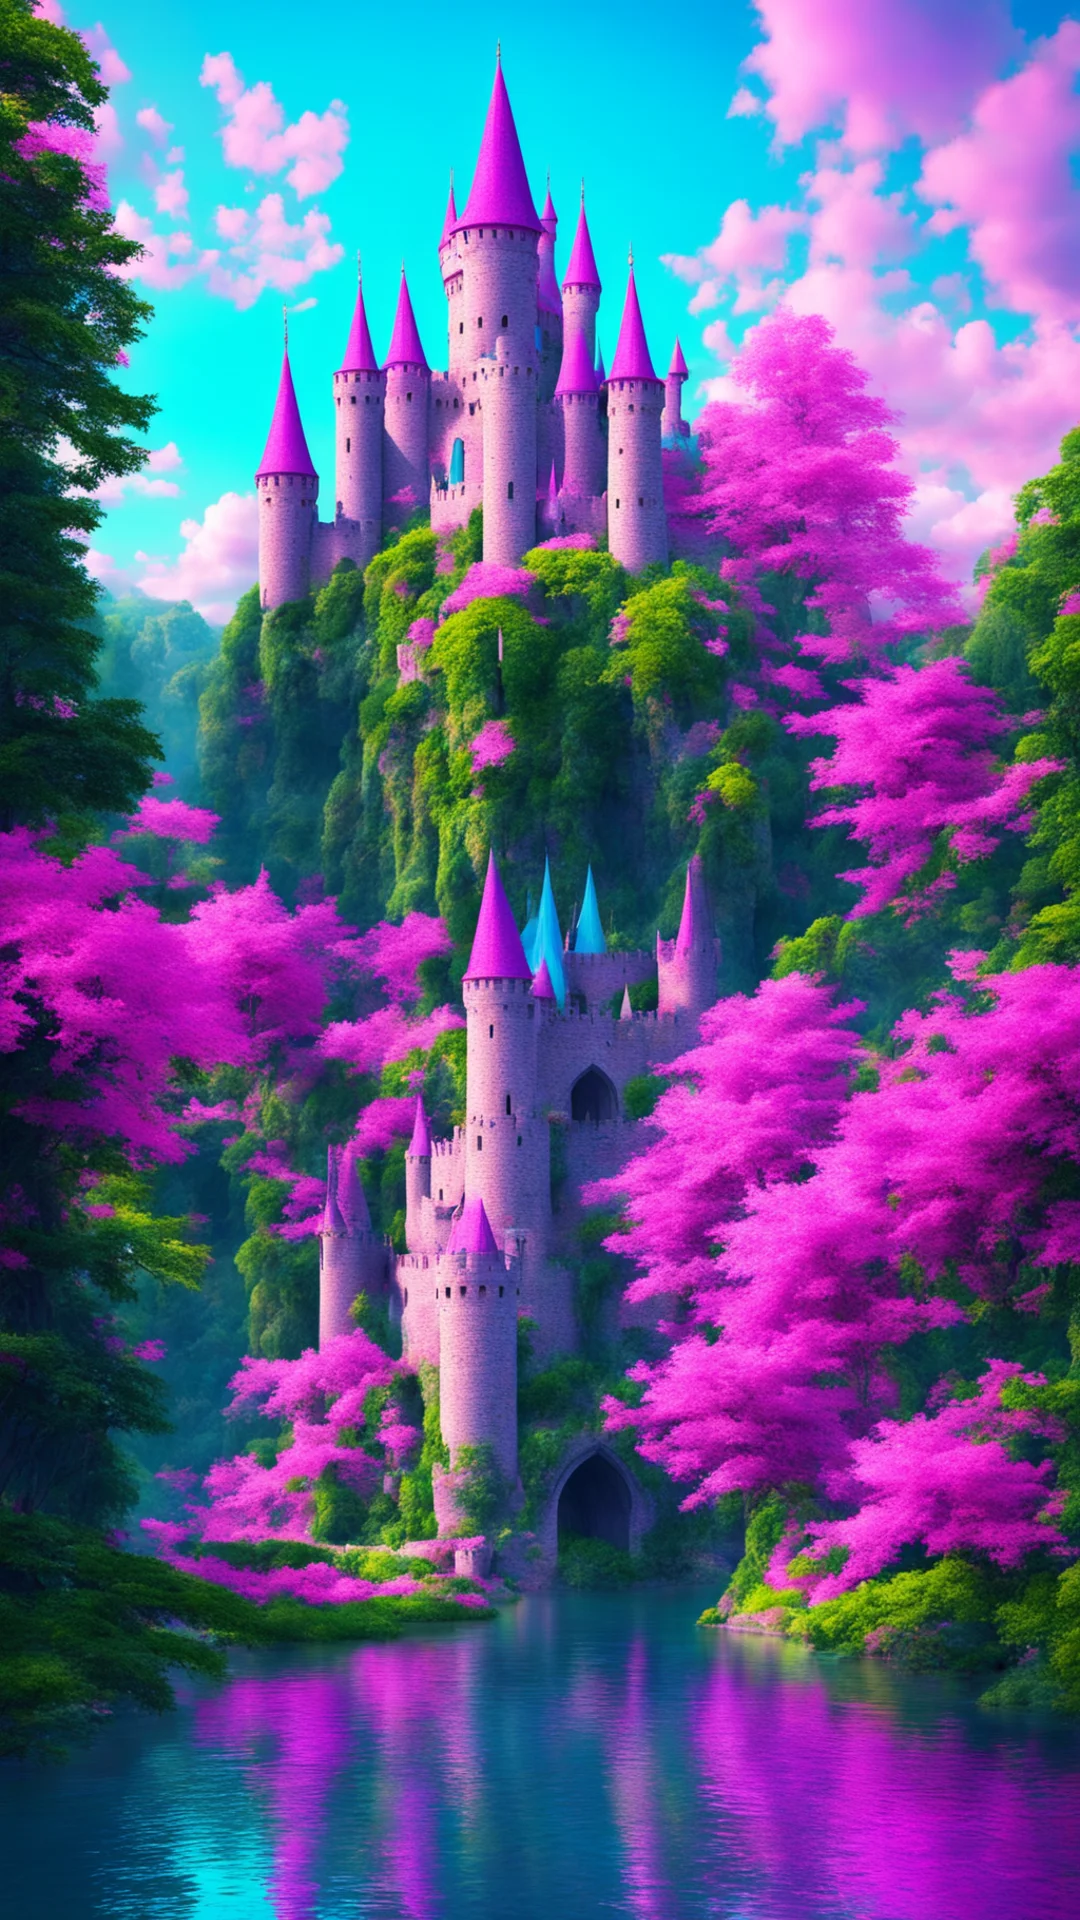 colorful amazing castle epic blue and pink fantasy castle moat tall